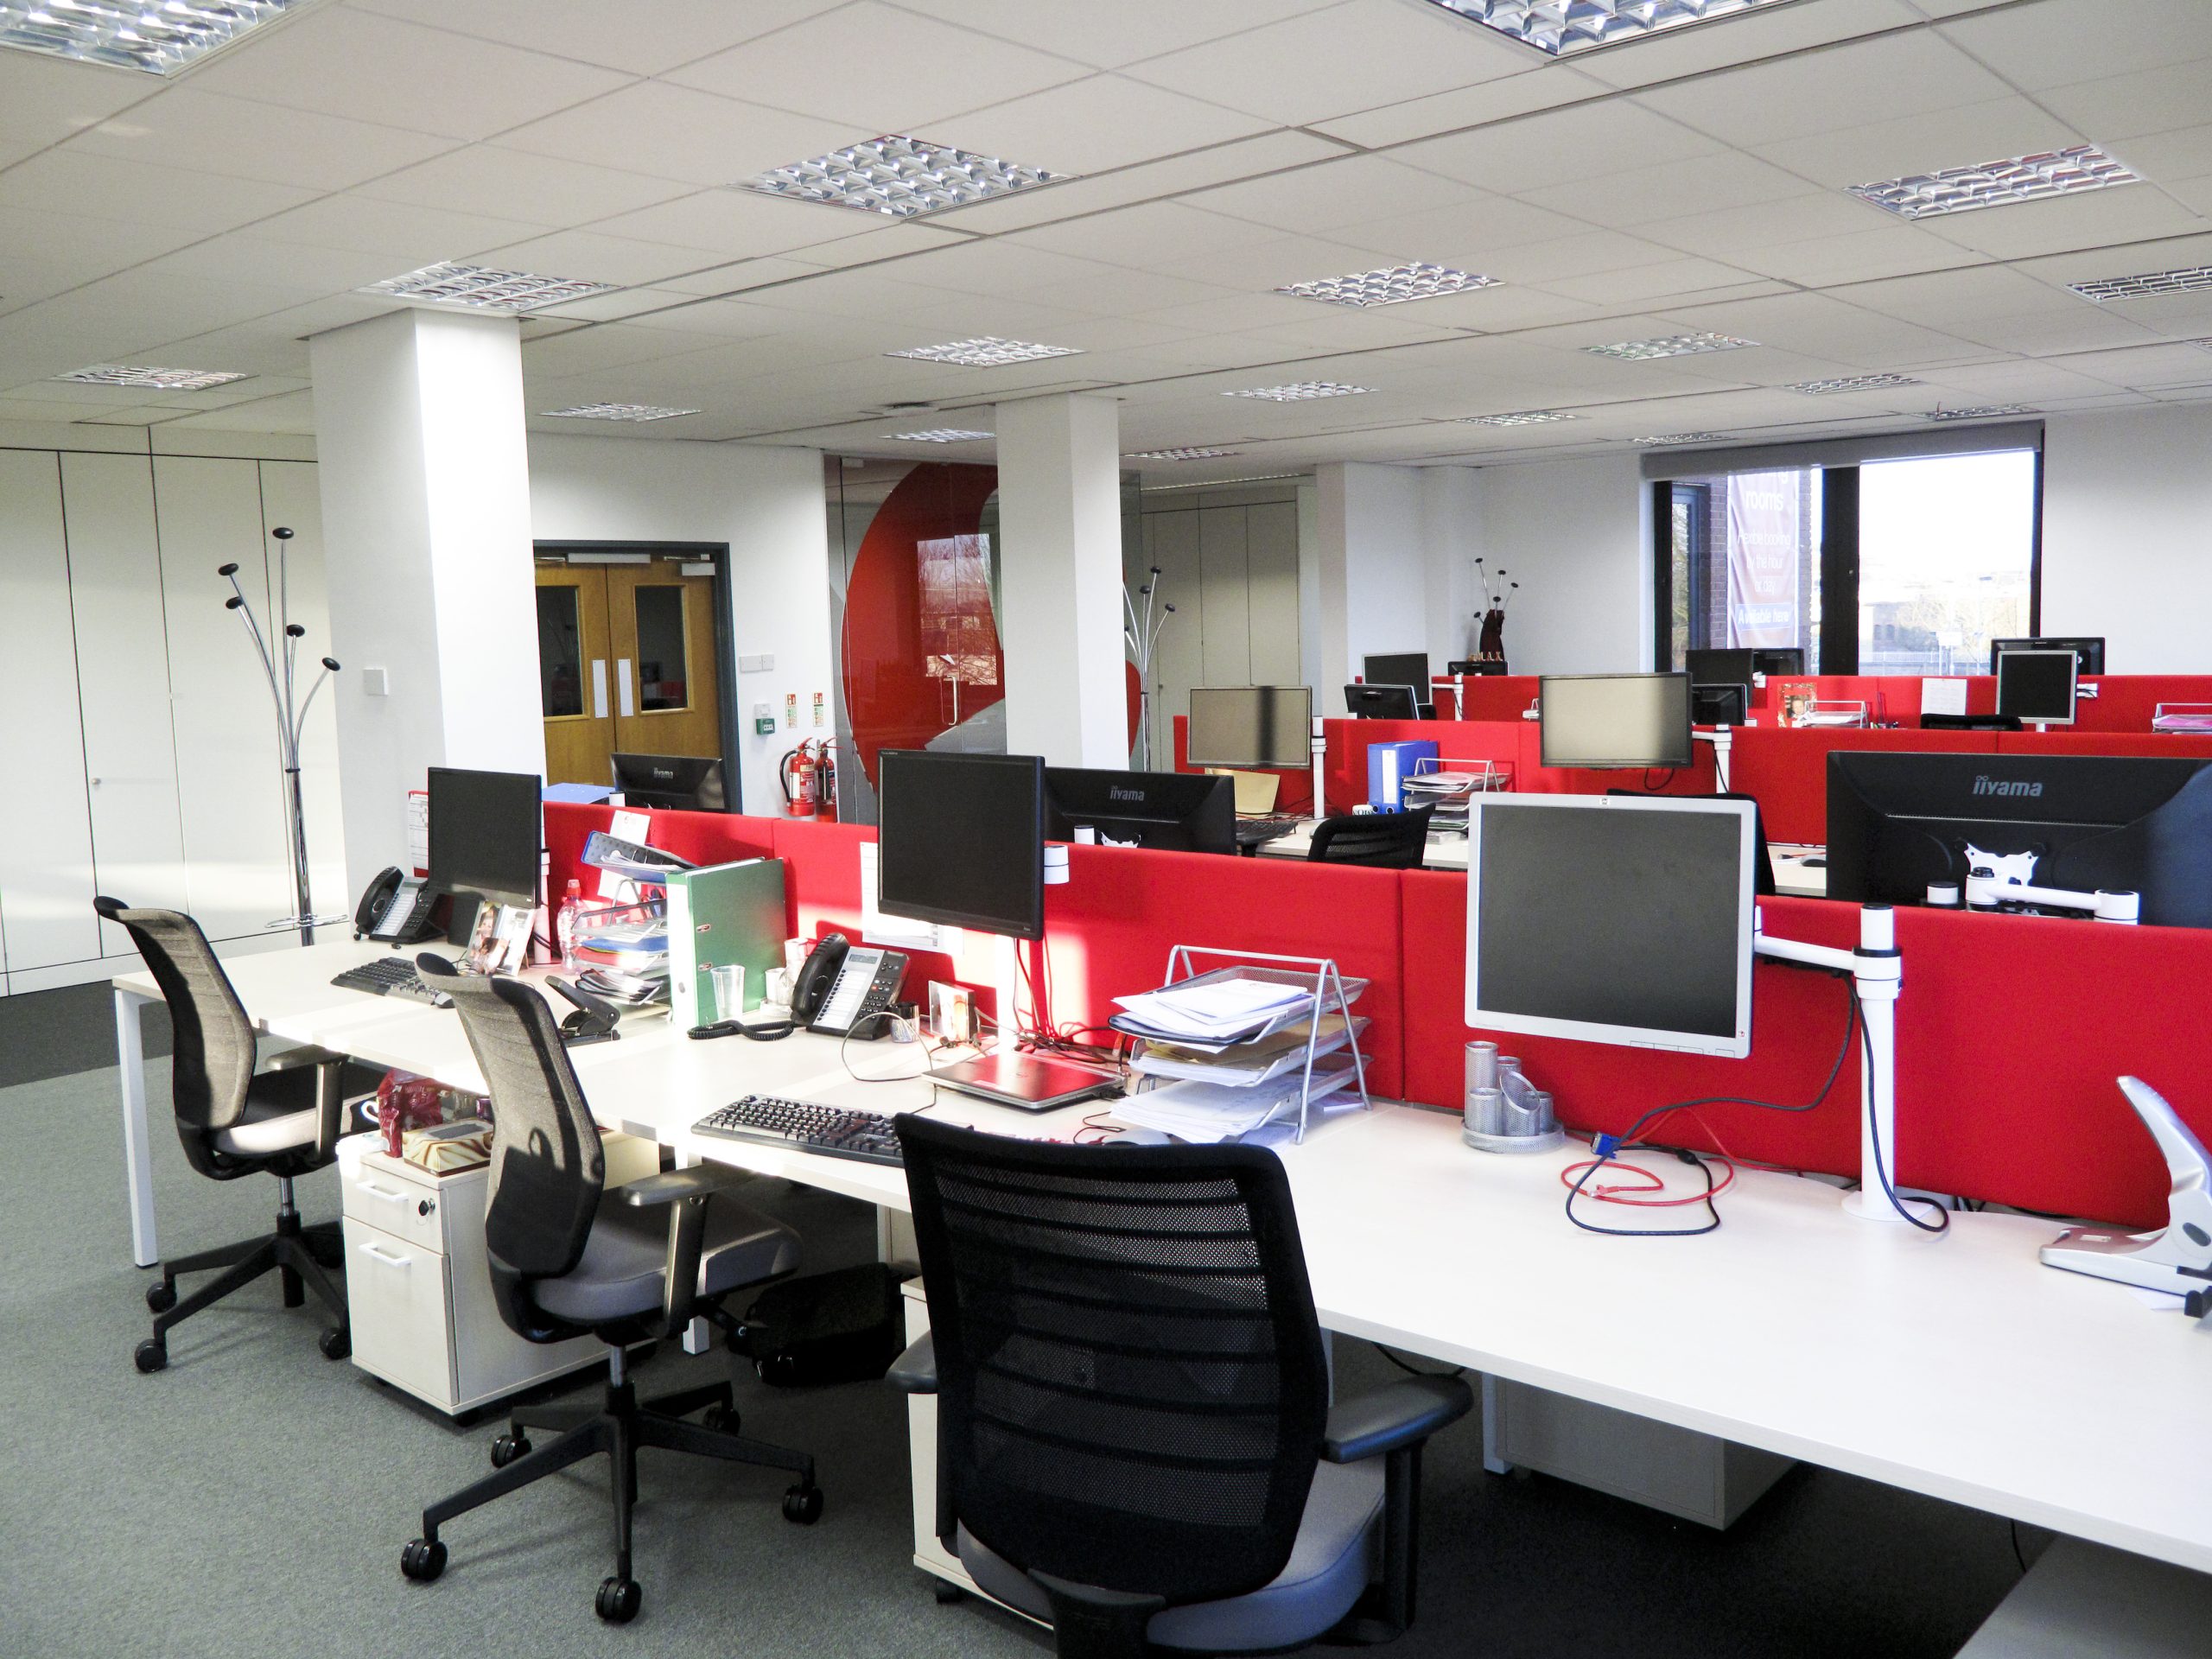 Essex Cares Hub Office Fit-Out Spacio